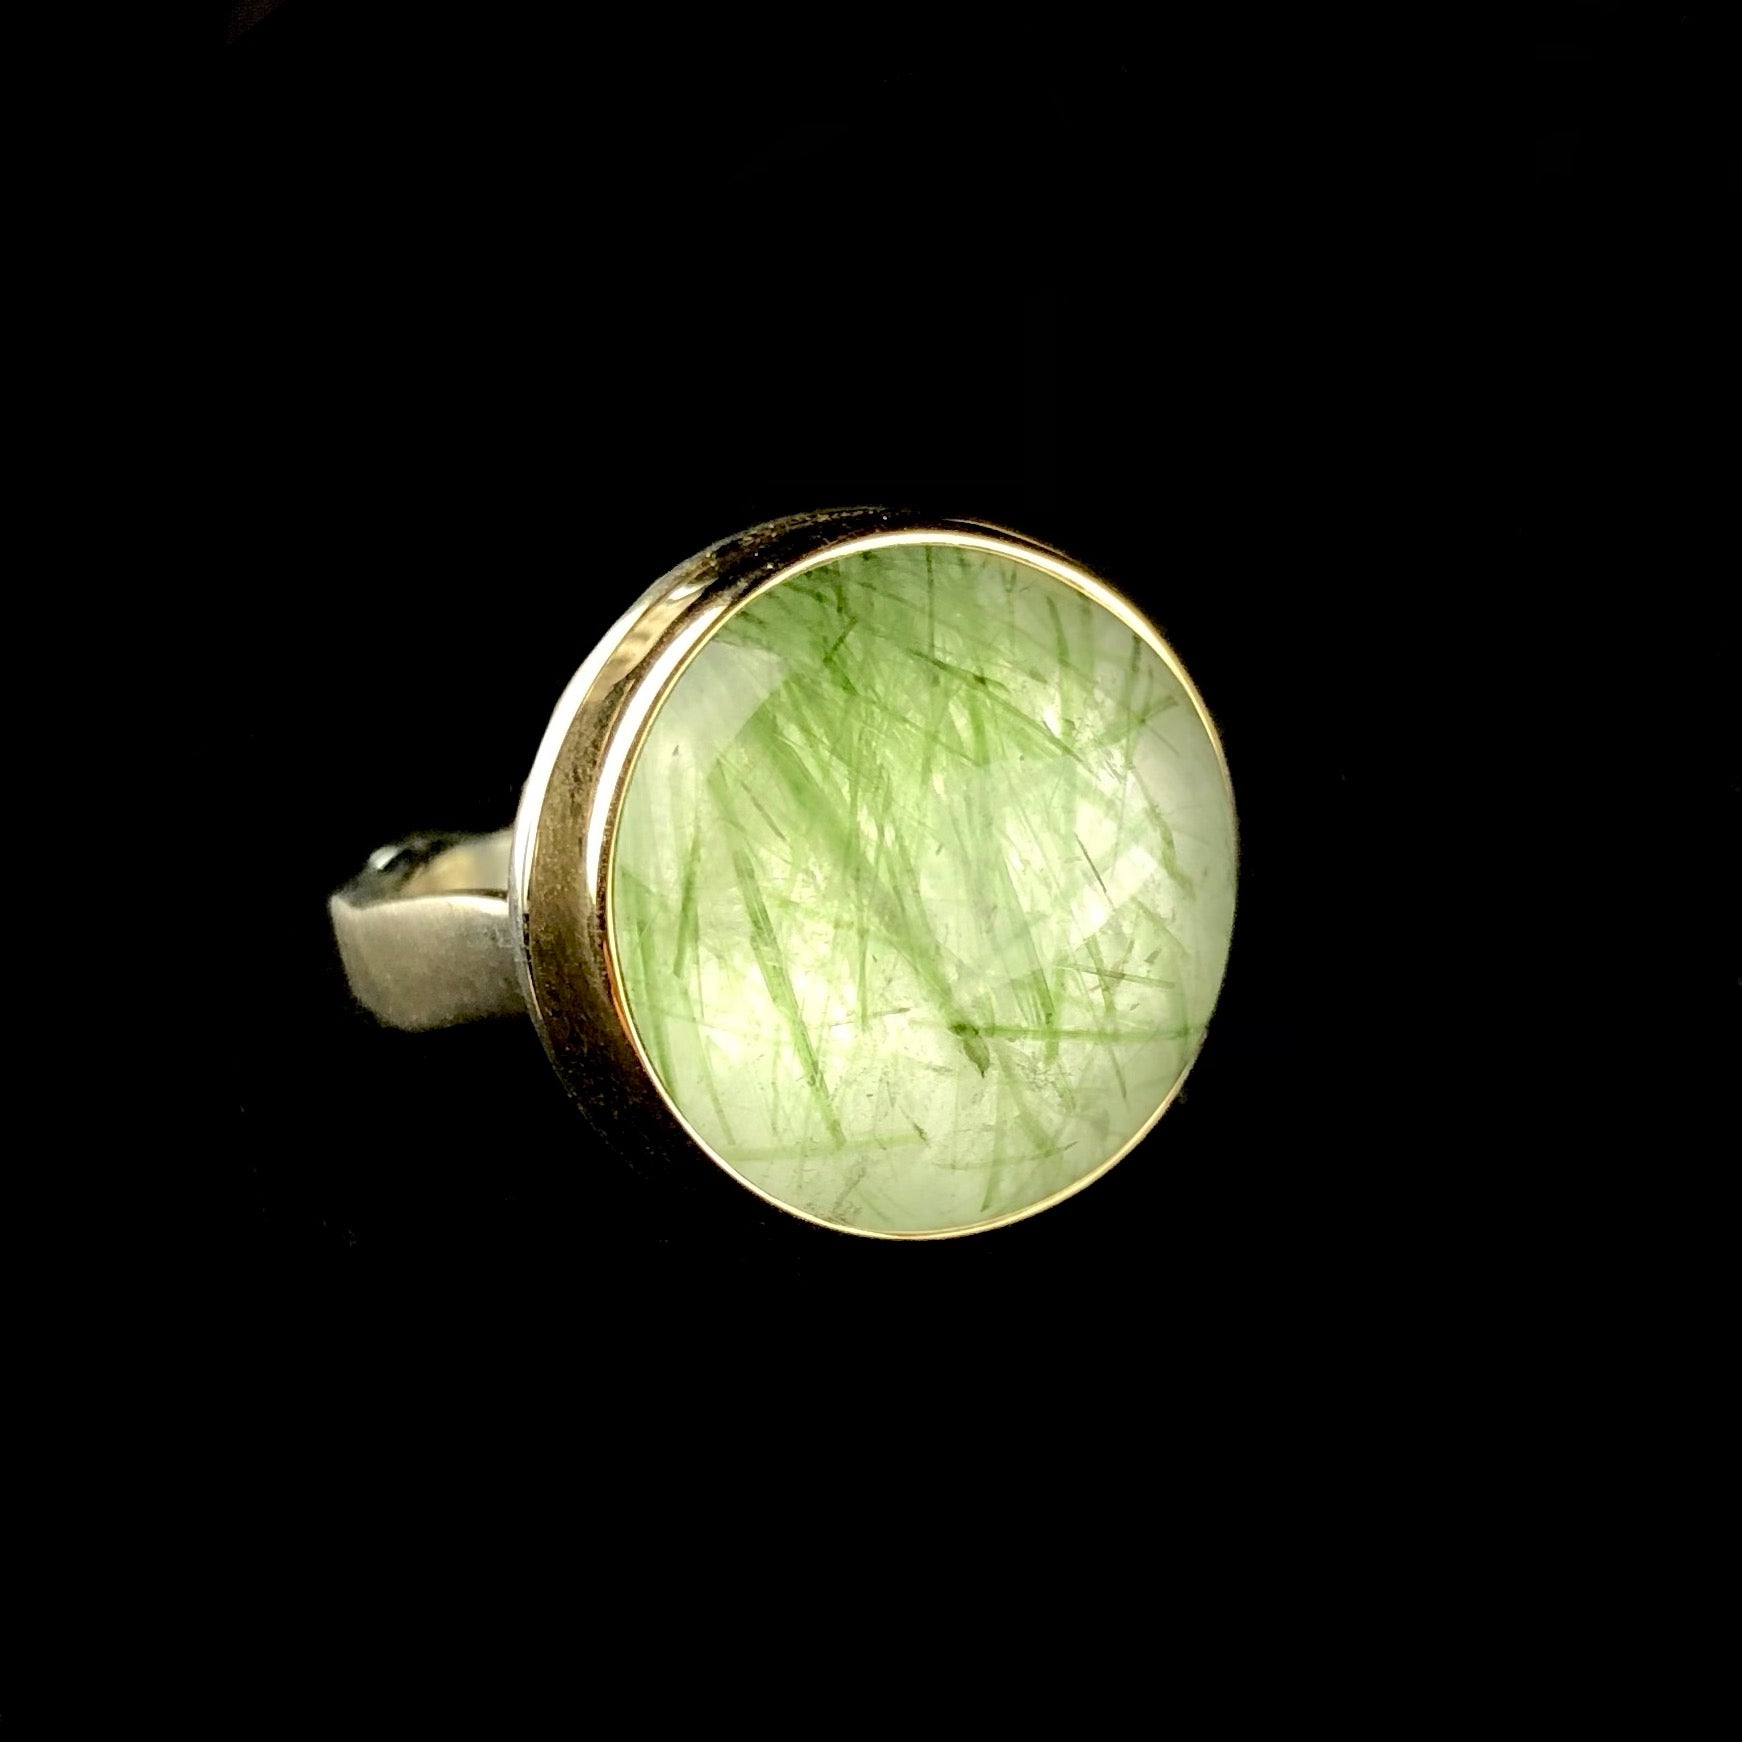 Round, light green prehnite stone with darker green traces inside ring